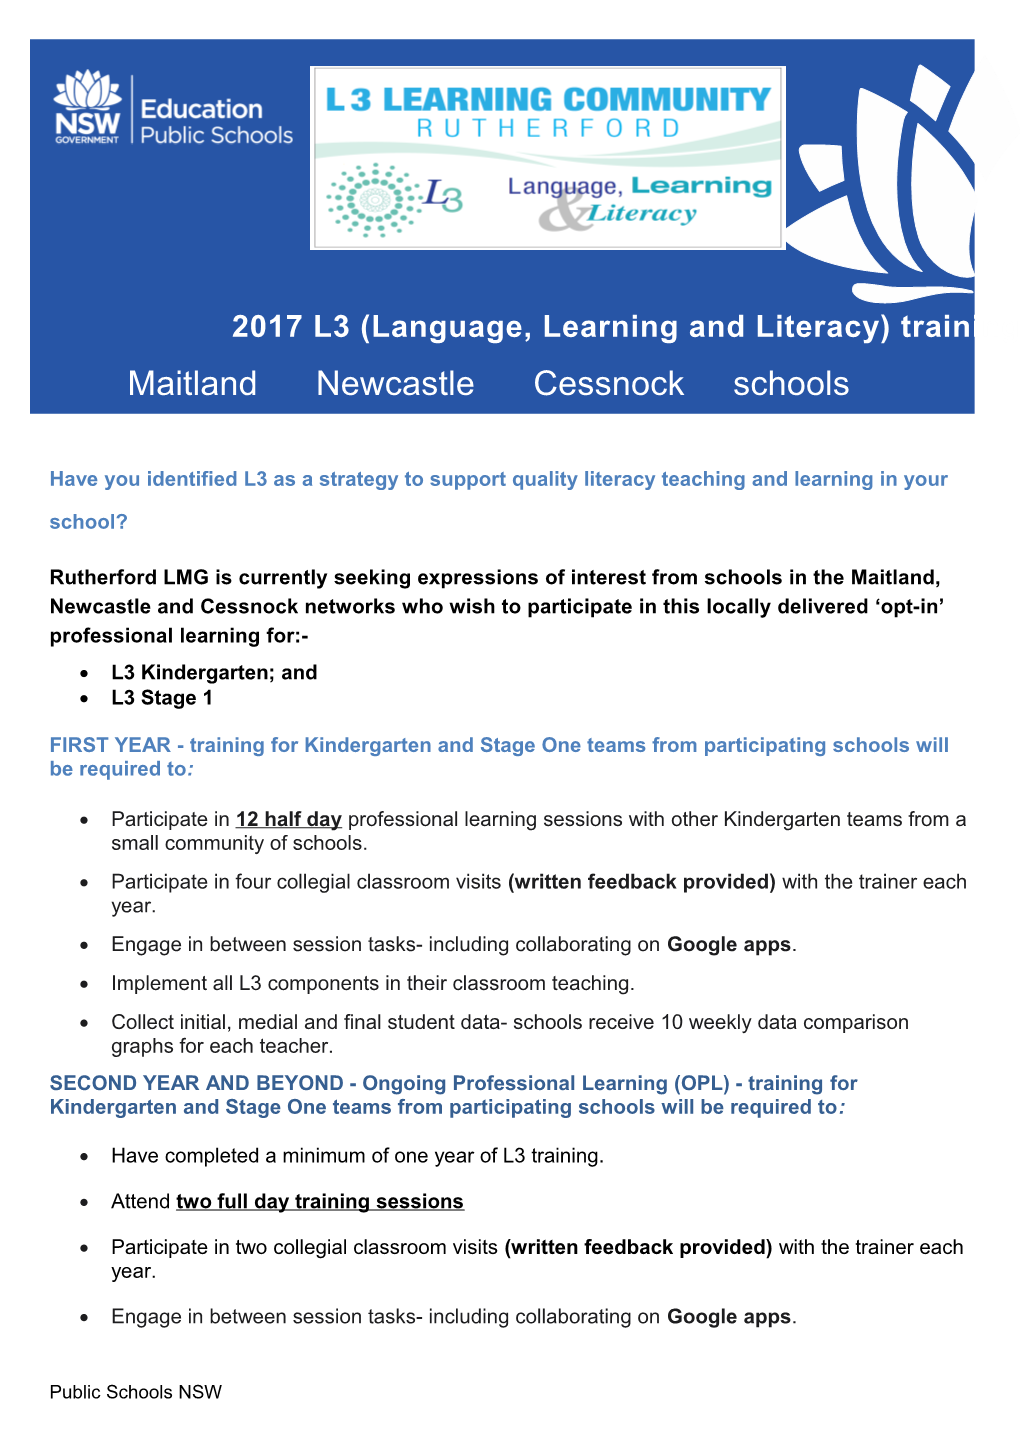 Rutherford LMG Is Currently Seeking Expressions of Interest from Schools in the Maitland